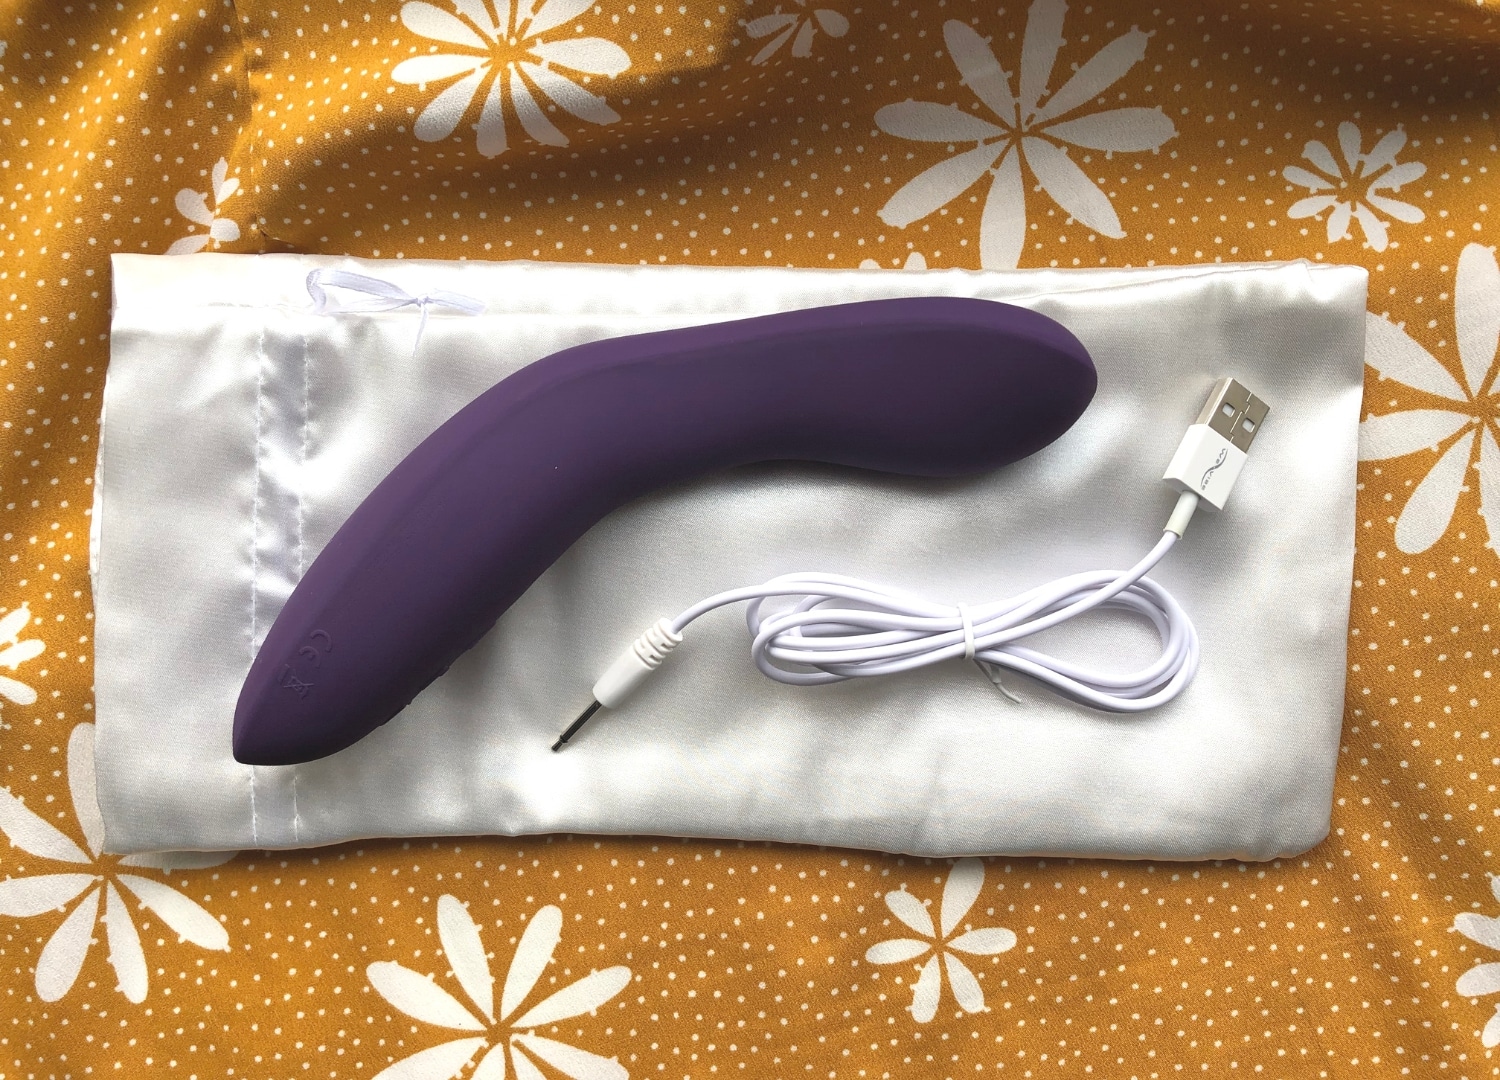 We-Vibe Rave App-Controlled Rechargeable G-Spot Vibrator. Slide 9